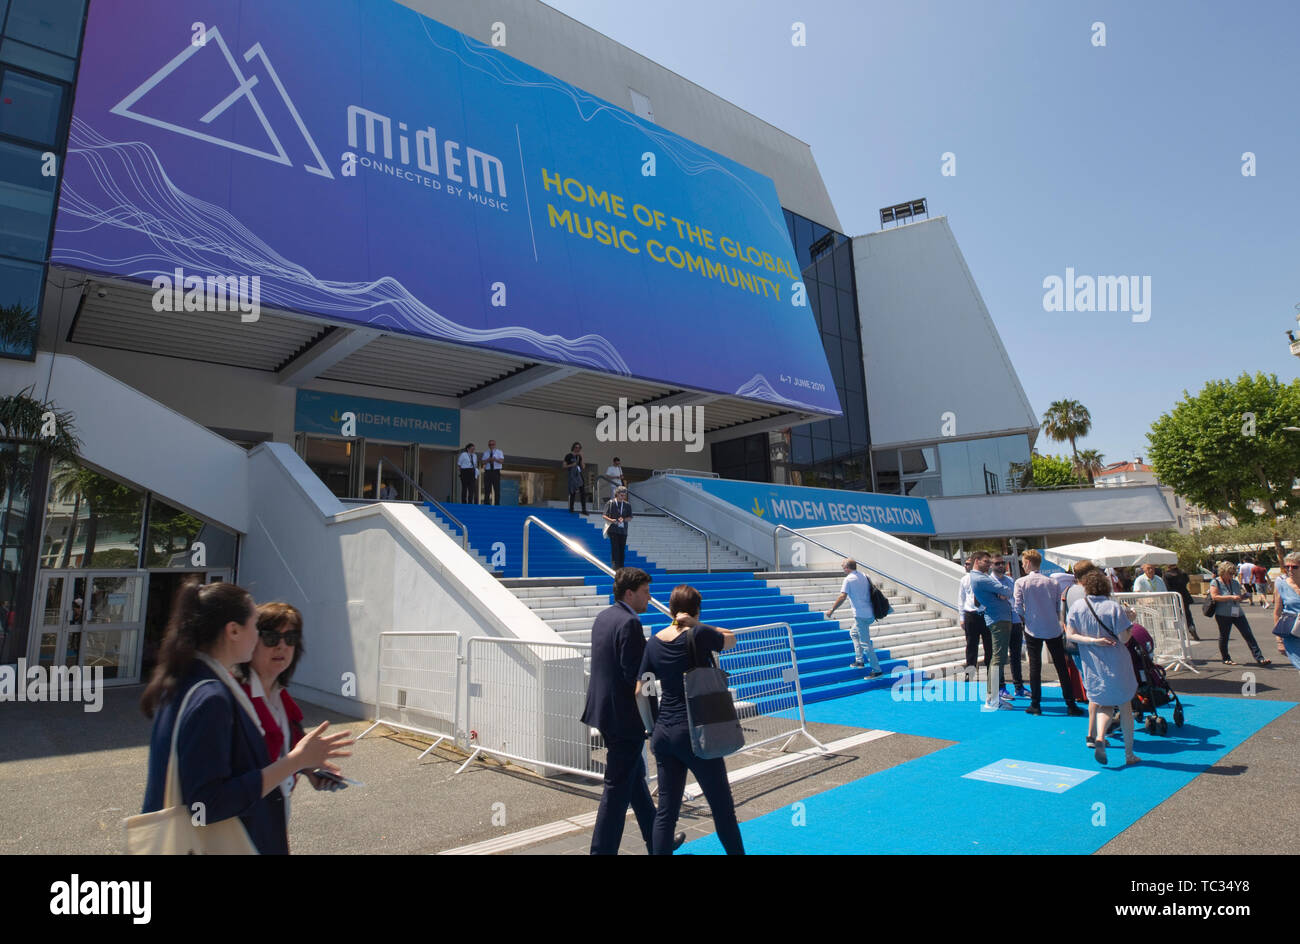 Cannes, France. 04th June, 2019. Cannes, France - June 04, 2019: MIDEM, the International B2B Music Market with general Palais des Festival Atmosphere. Messe, Fachmesse, Reed MIDEM, Trade Fair, MIPTV, MIPCOM | usage worldwide Credit: dpa/Alamy Live News Stock Photo